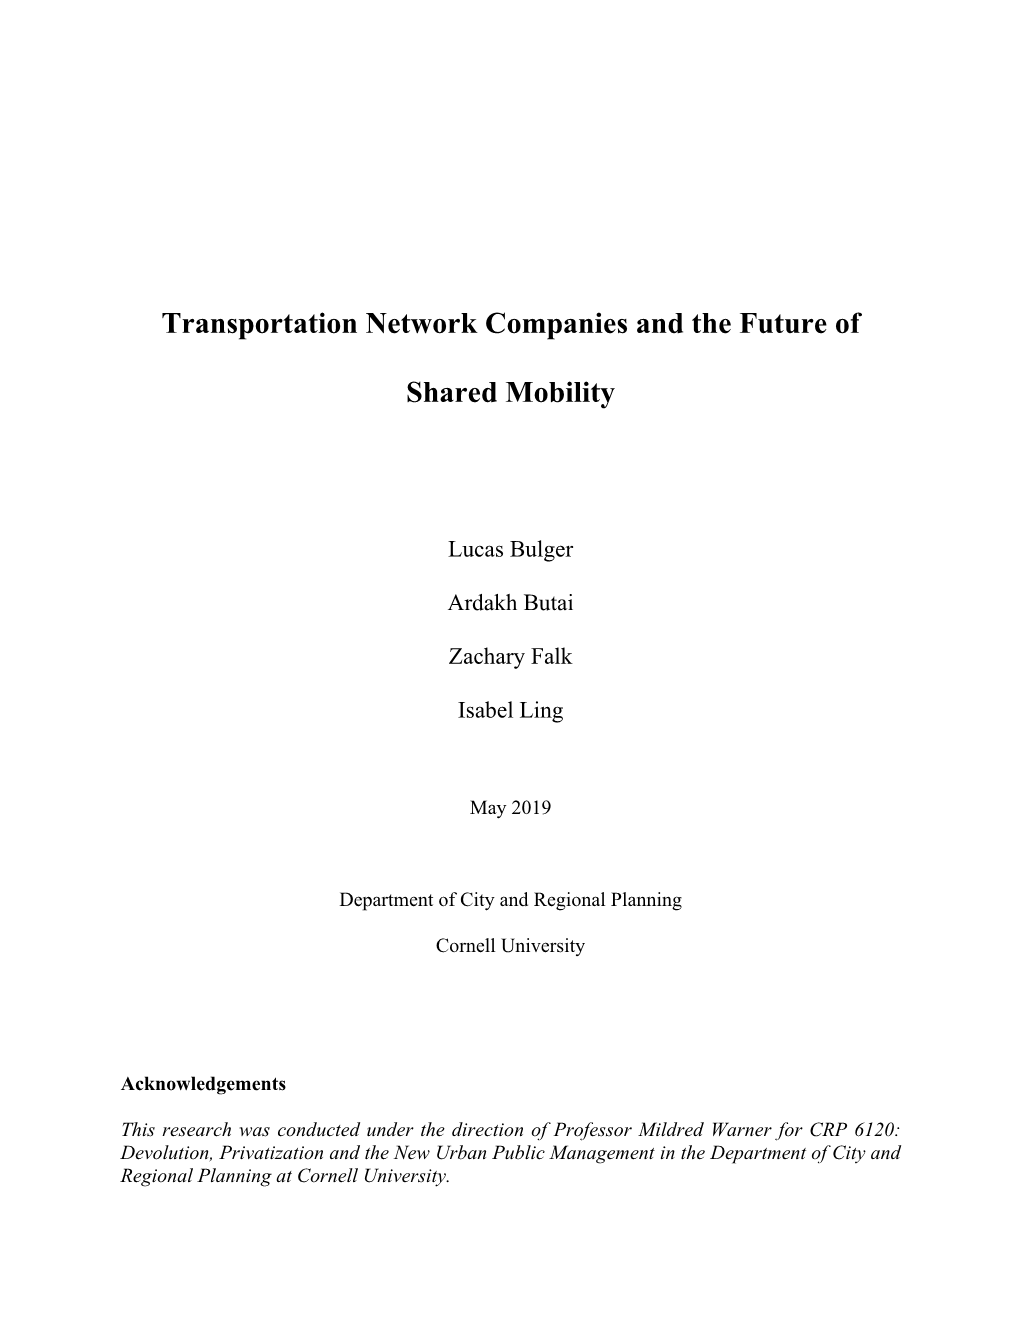 Transportation Network Companies and the Future of Shared Mobility (2019)